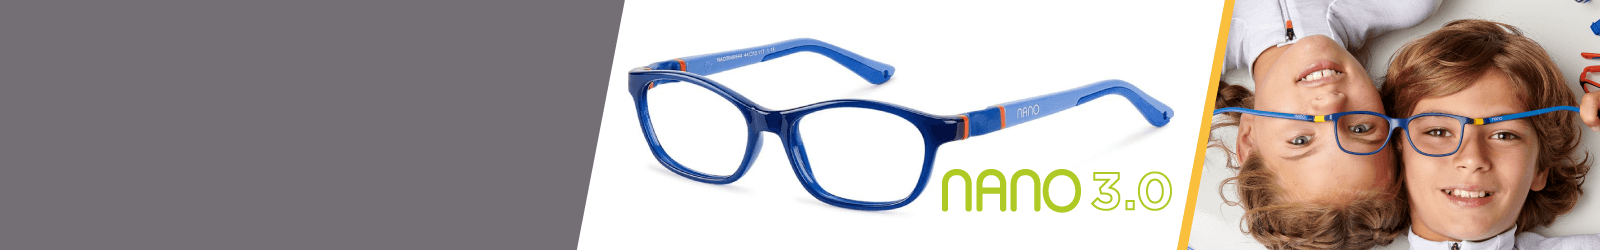 Indigo Nano 3.0 Indestructible Kids Glasses from 6 to 8-year-old